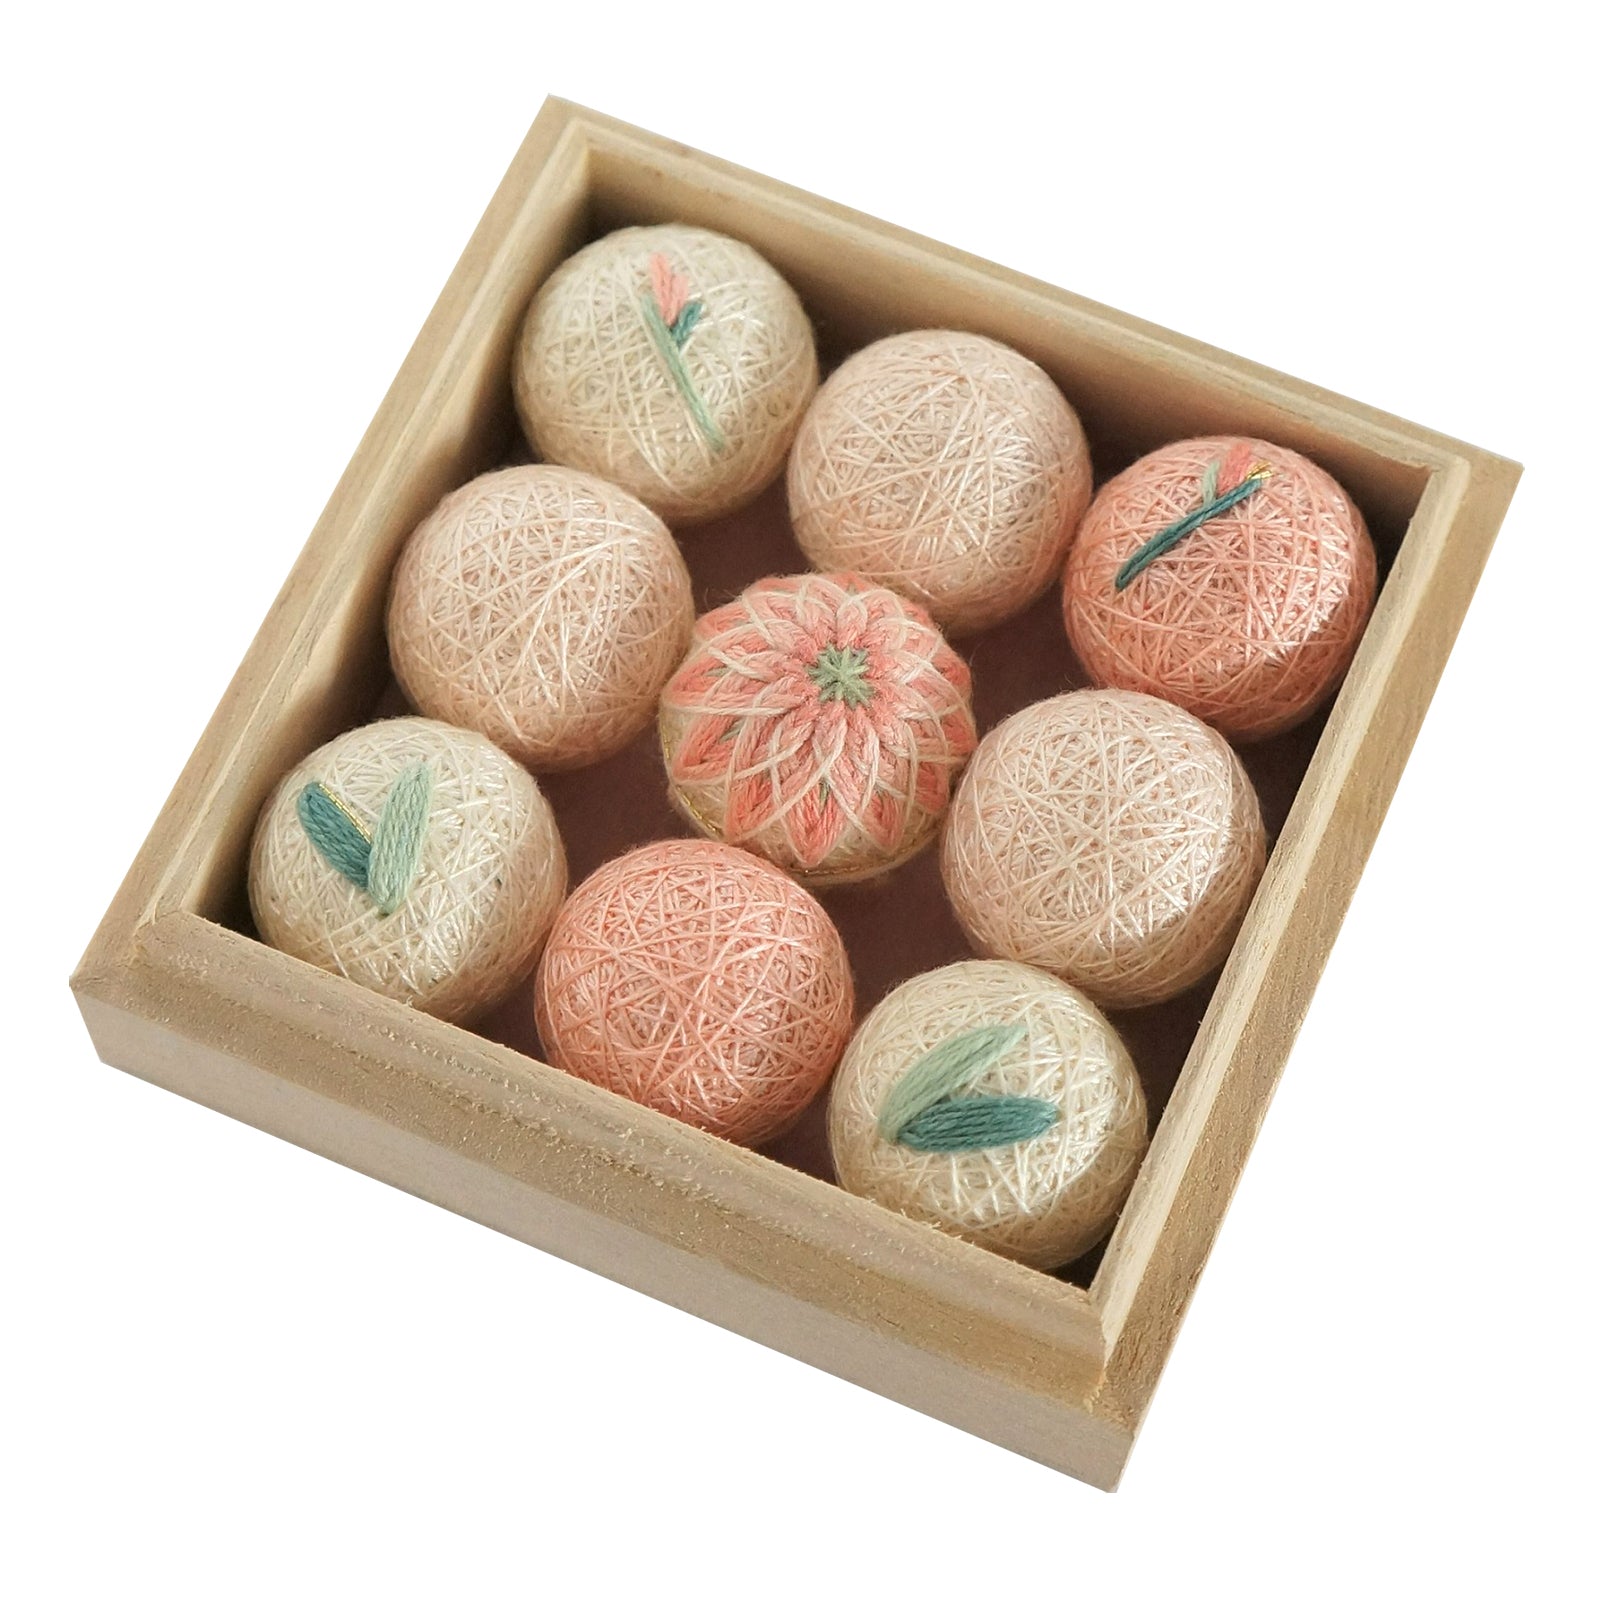 Scented Small Embroidery "Temari" Box - By Emotion International